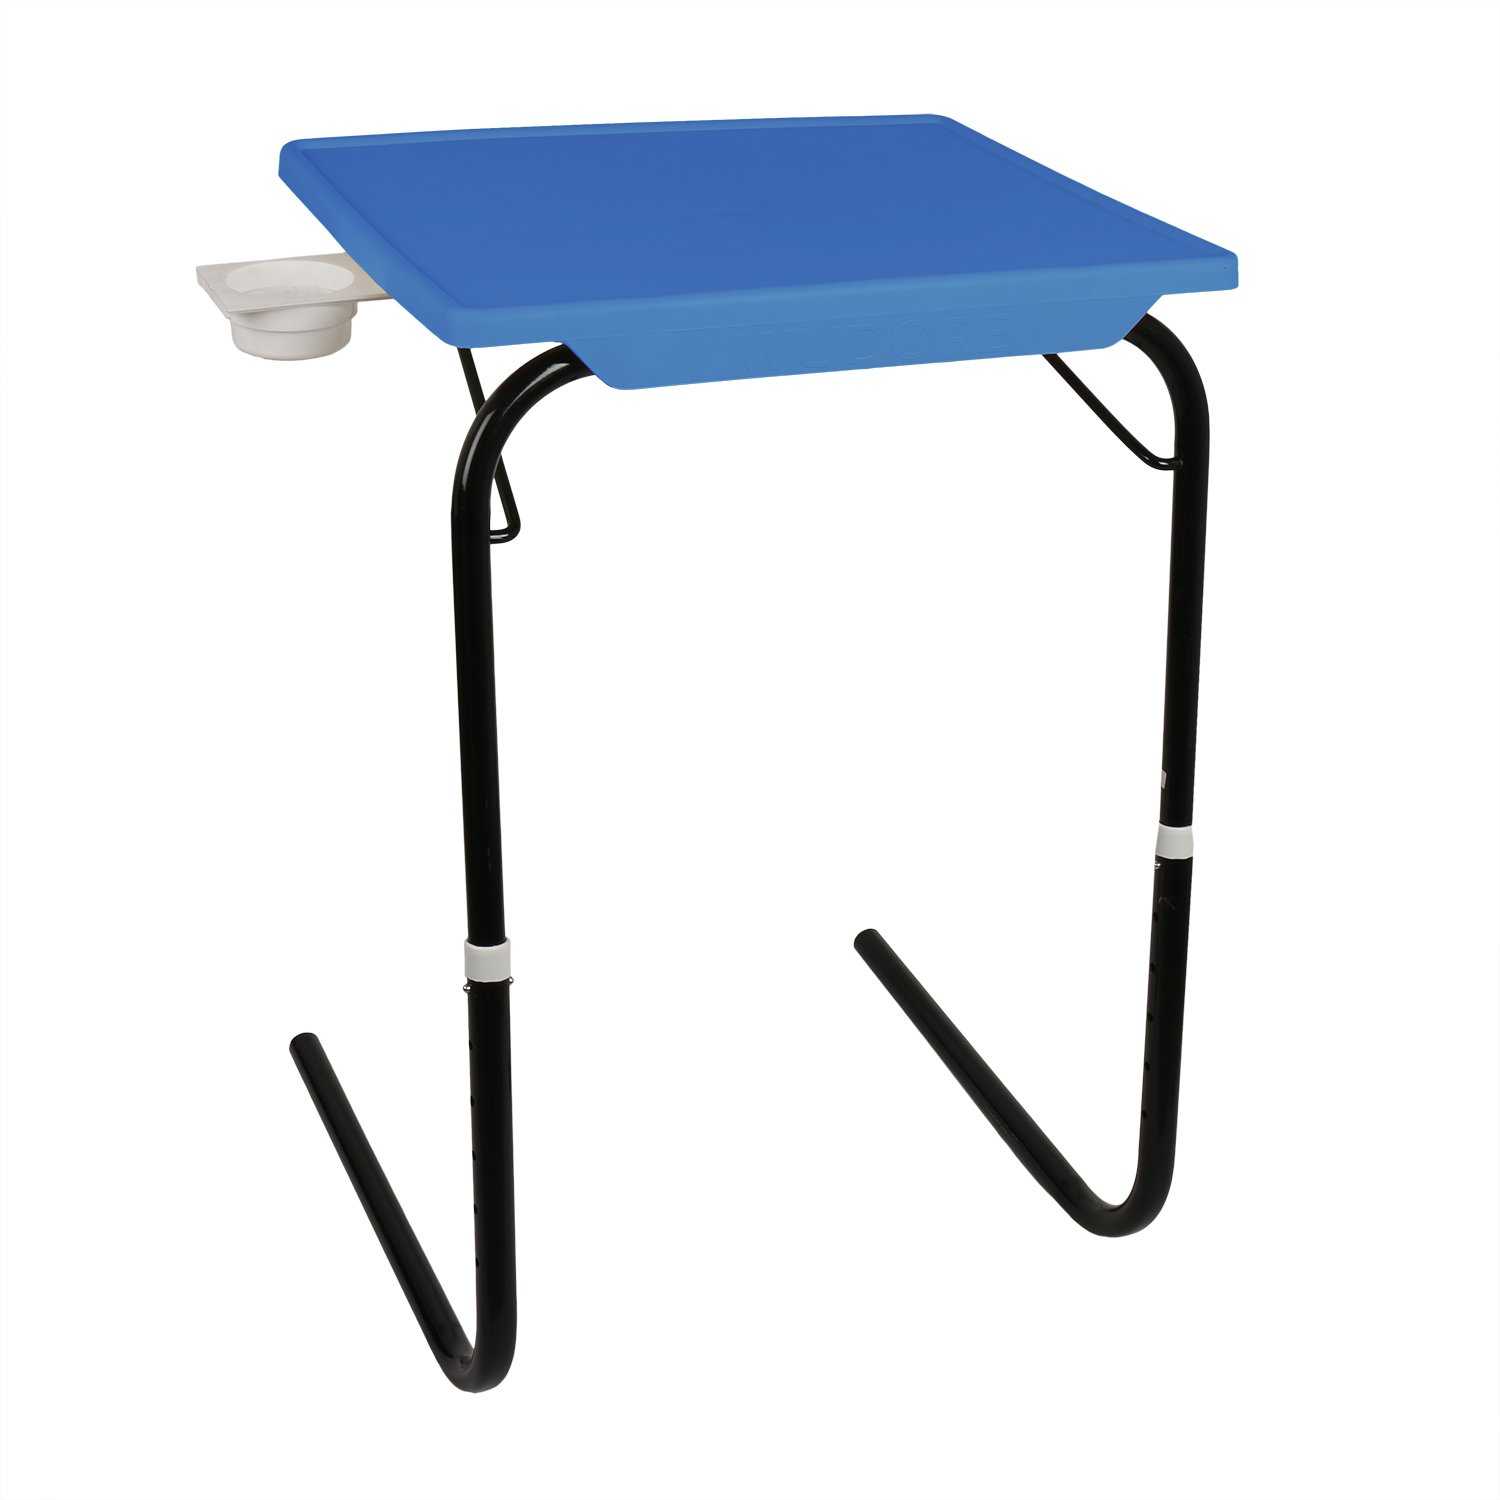  Tablemate with black legs and blue finishing | Wudore